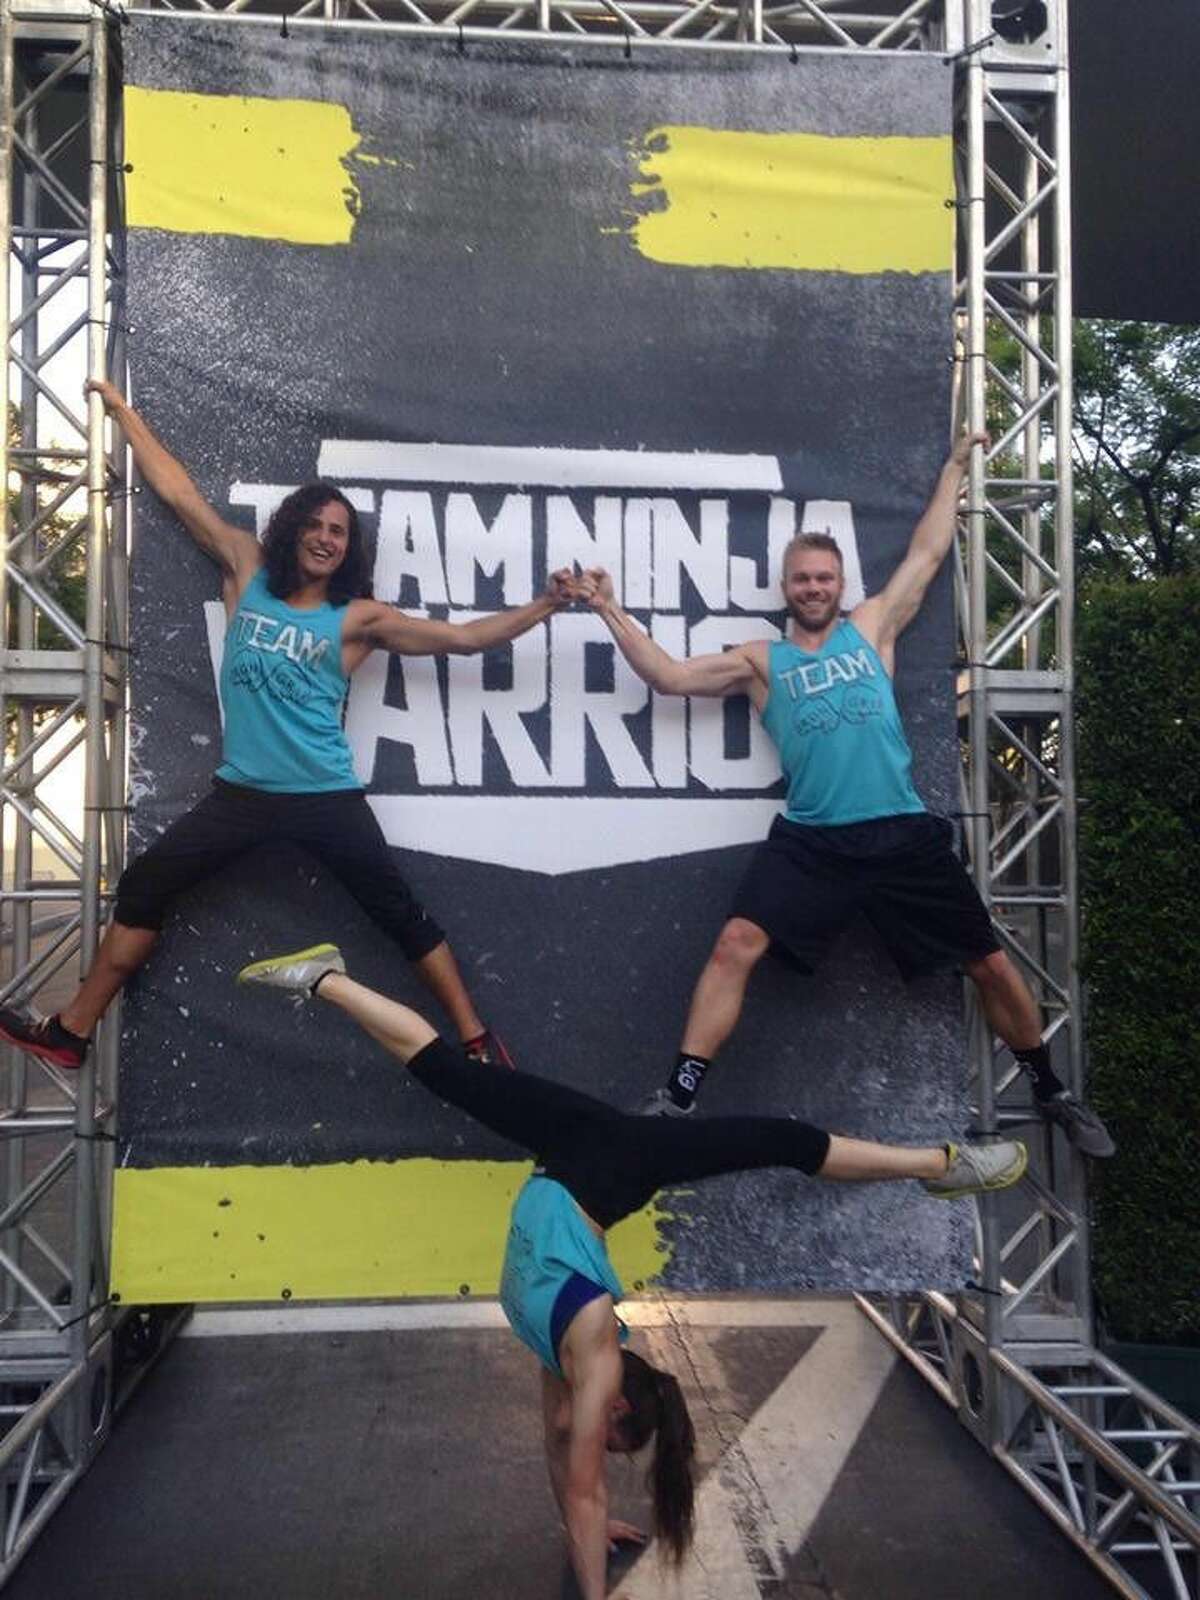 After Stockett competed, Gil asked her to be a part of his team, Iron Grip, for “Team Ninja Warrior” which is a television show on the Esquire Network. They recently wrapped up filming and the show will air in January 2017 featuring Stockett and her Iron Grip teammates.